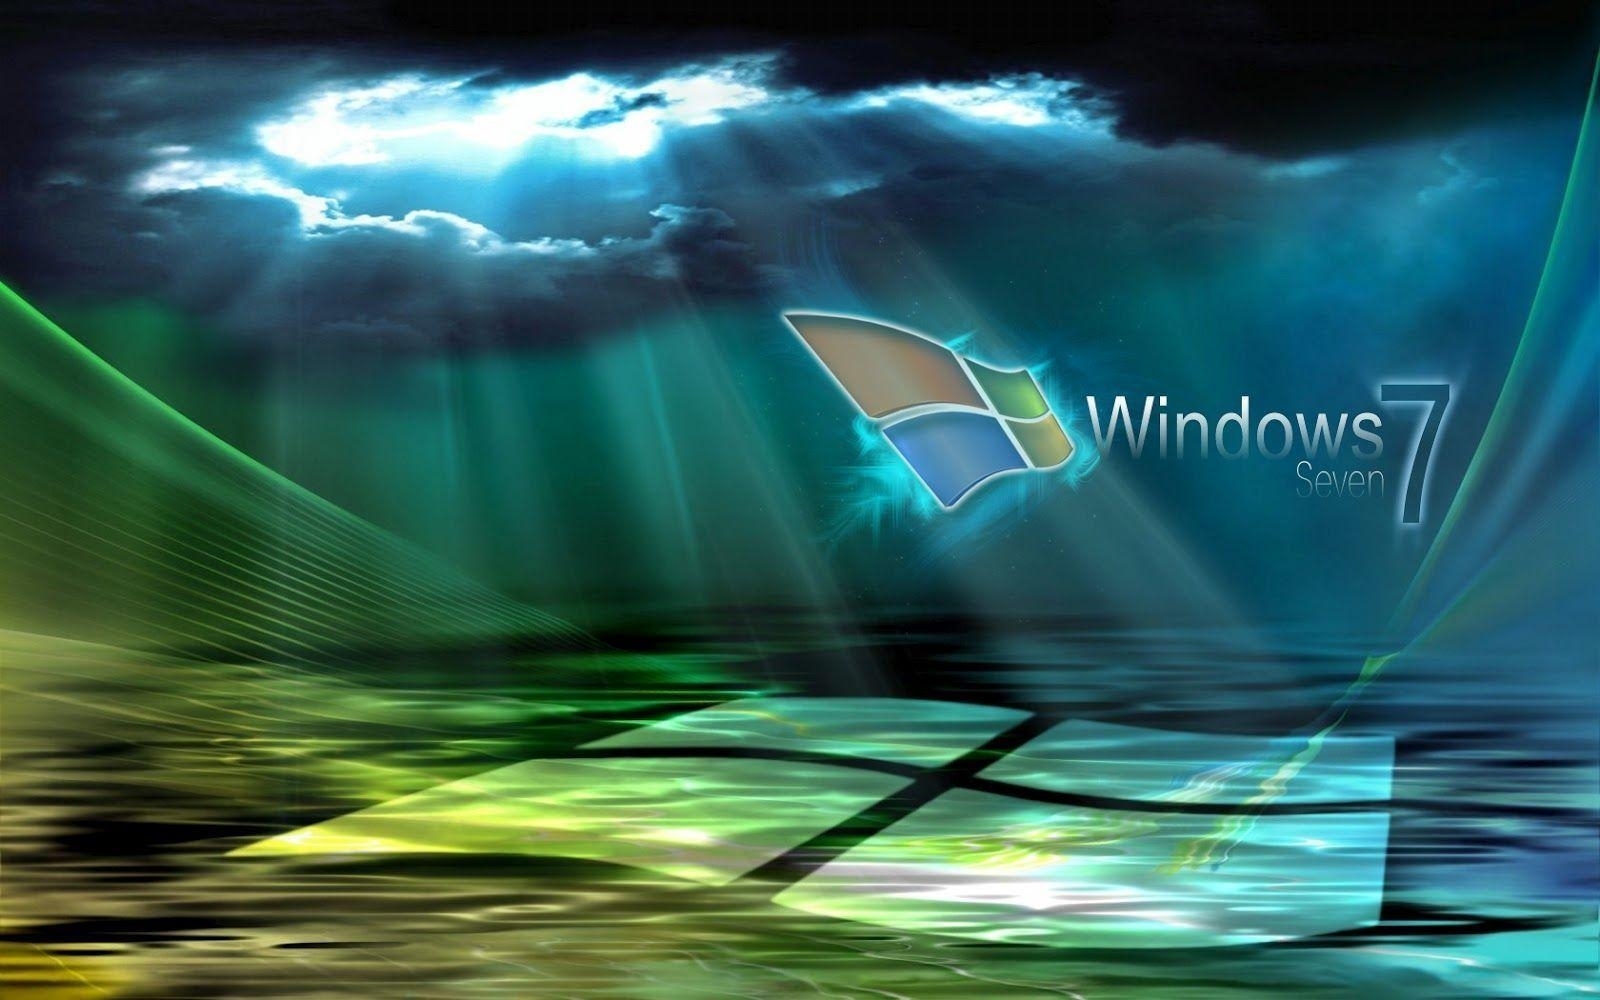 10 New Live Wallpapers For Pc Windows 7 Free Download FULL ...